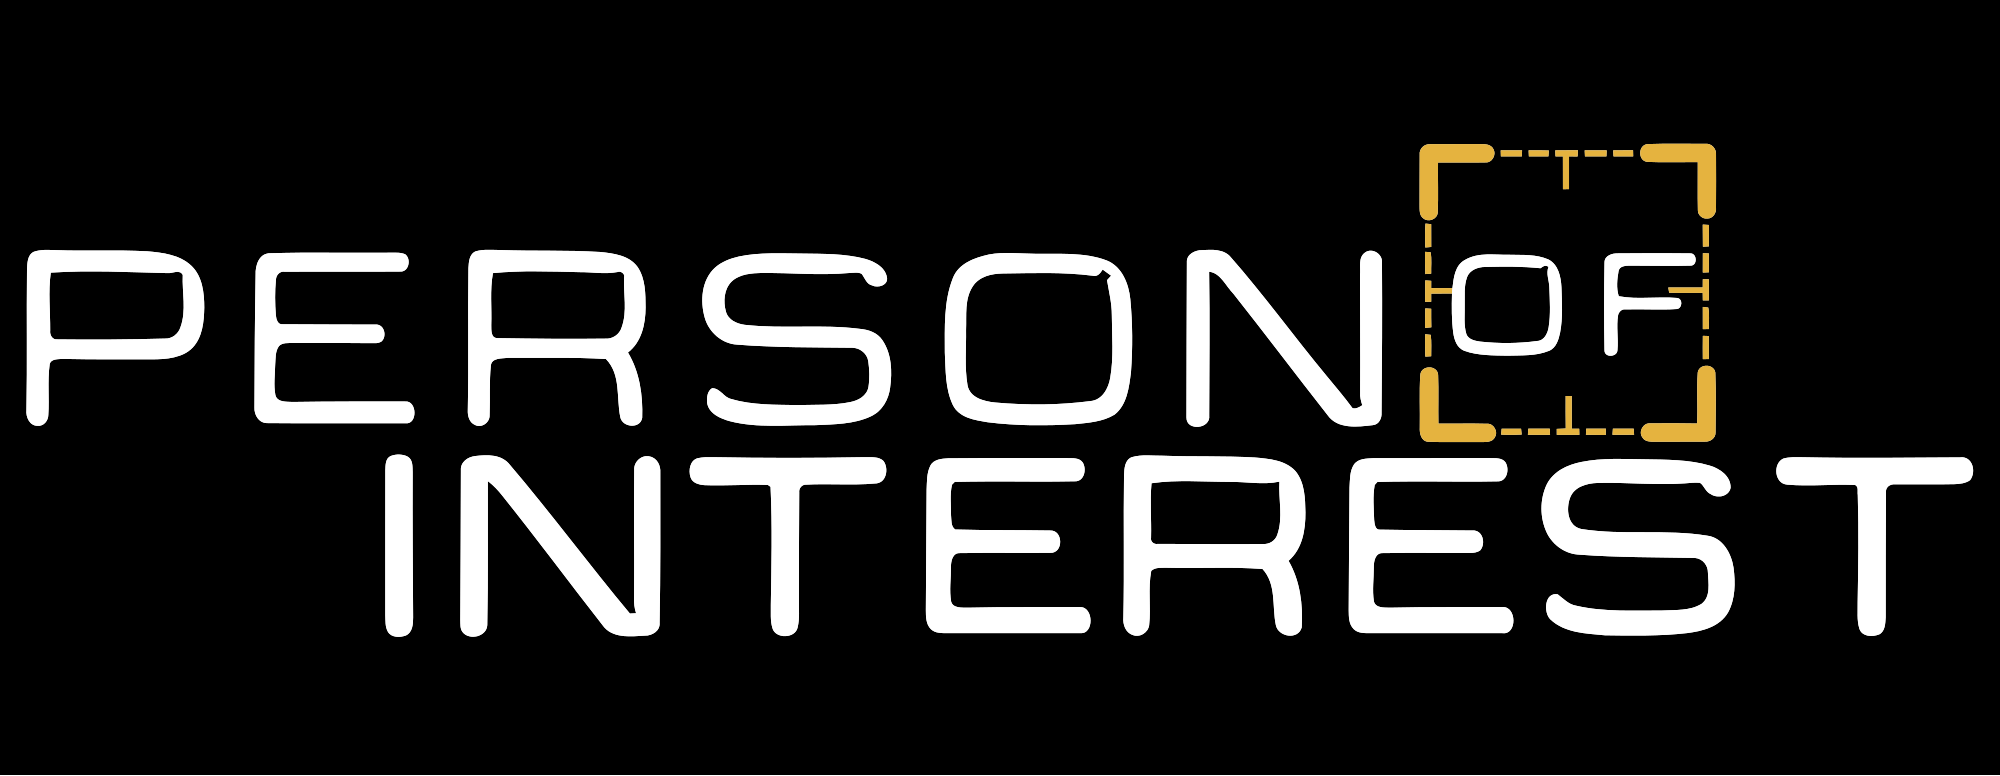 2000px-CBS_Person_of_Interest_-_Logo_(black).svg.png